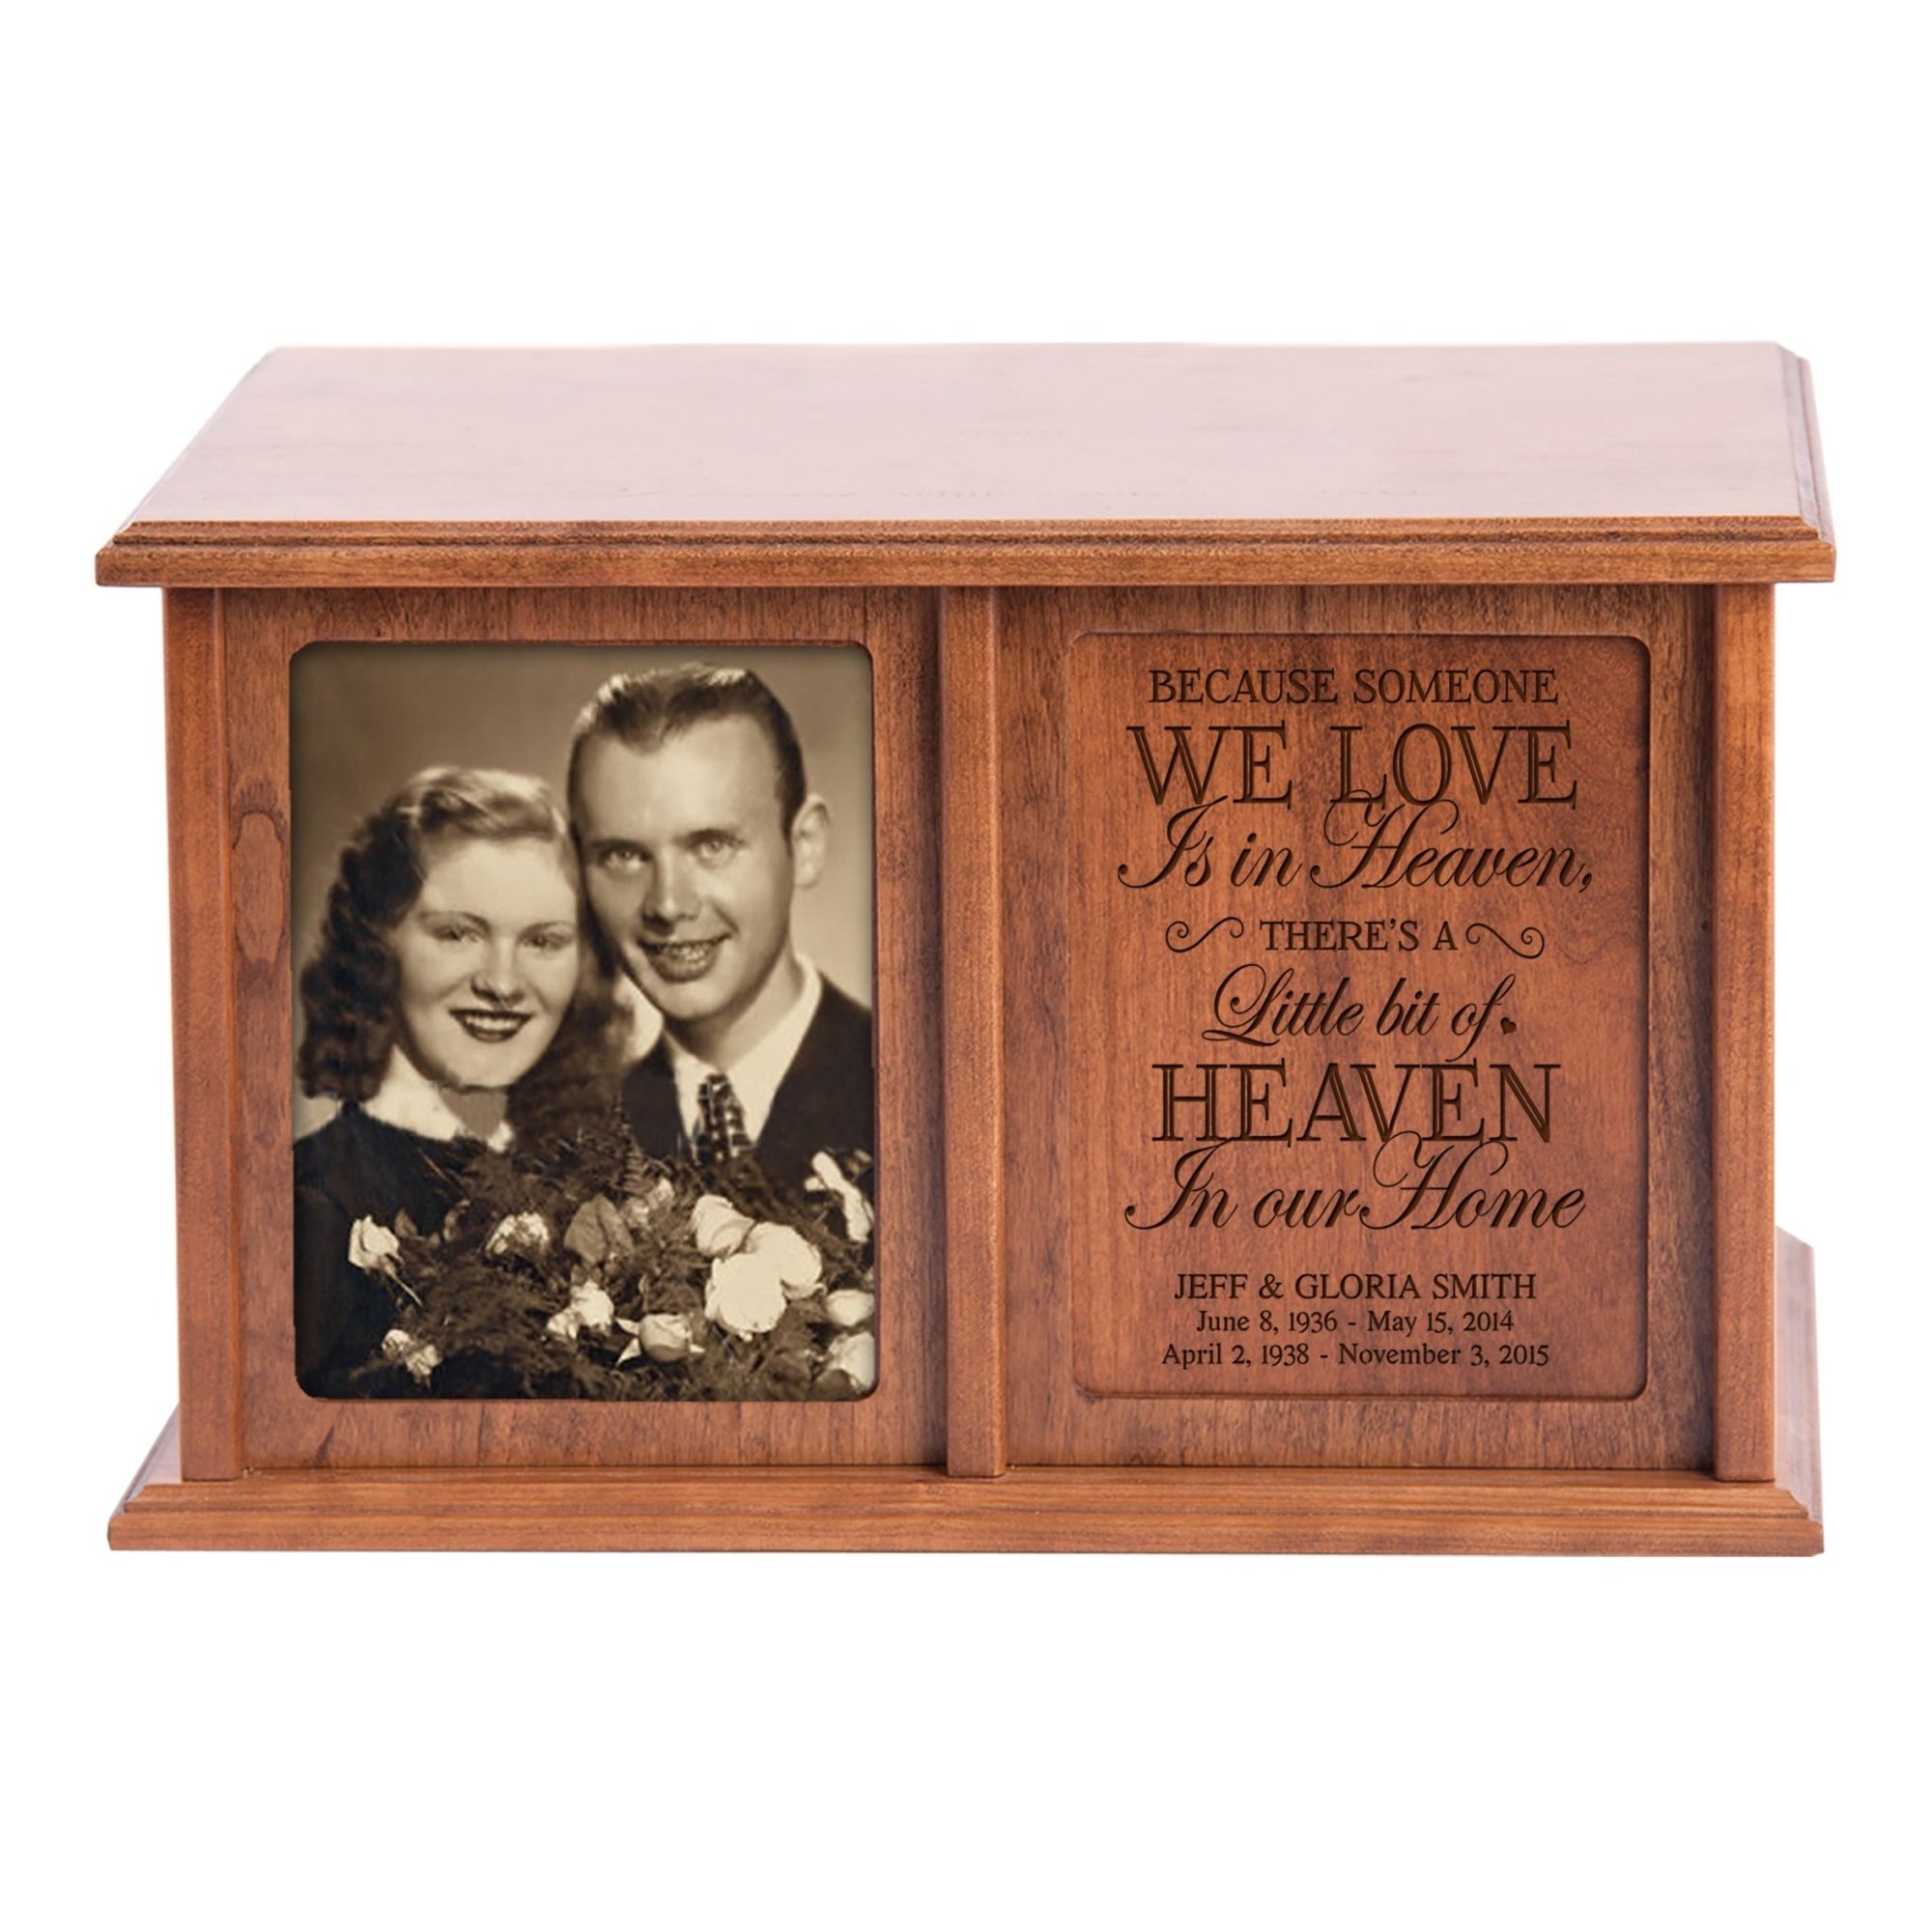 Various wooden urns for ashes including custom, engraved, and personalized options, suitable for funeral memorials and as keepsakes